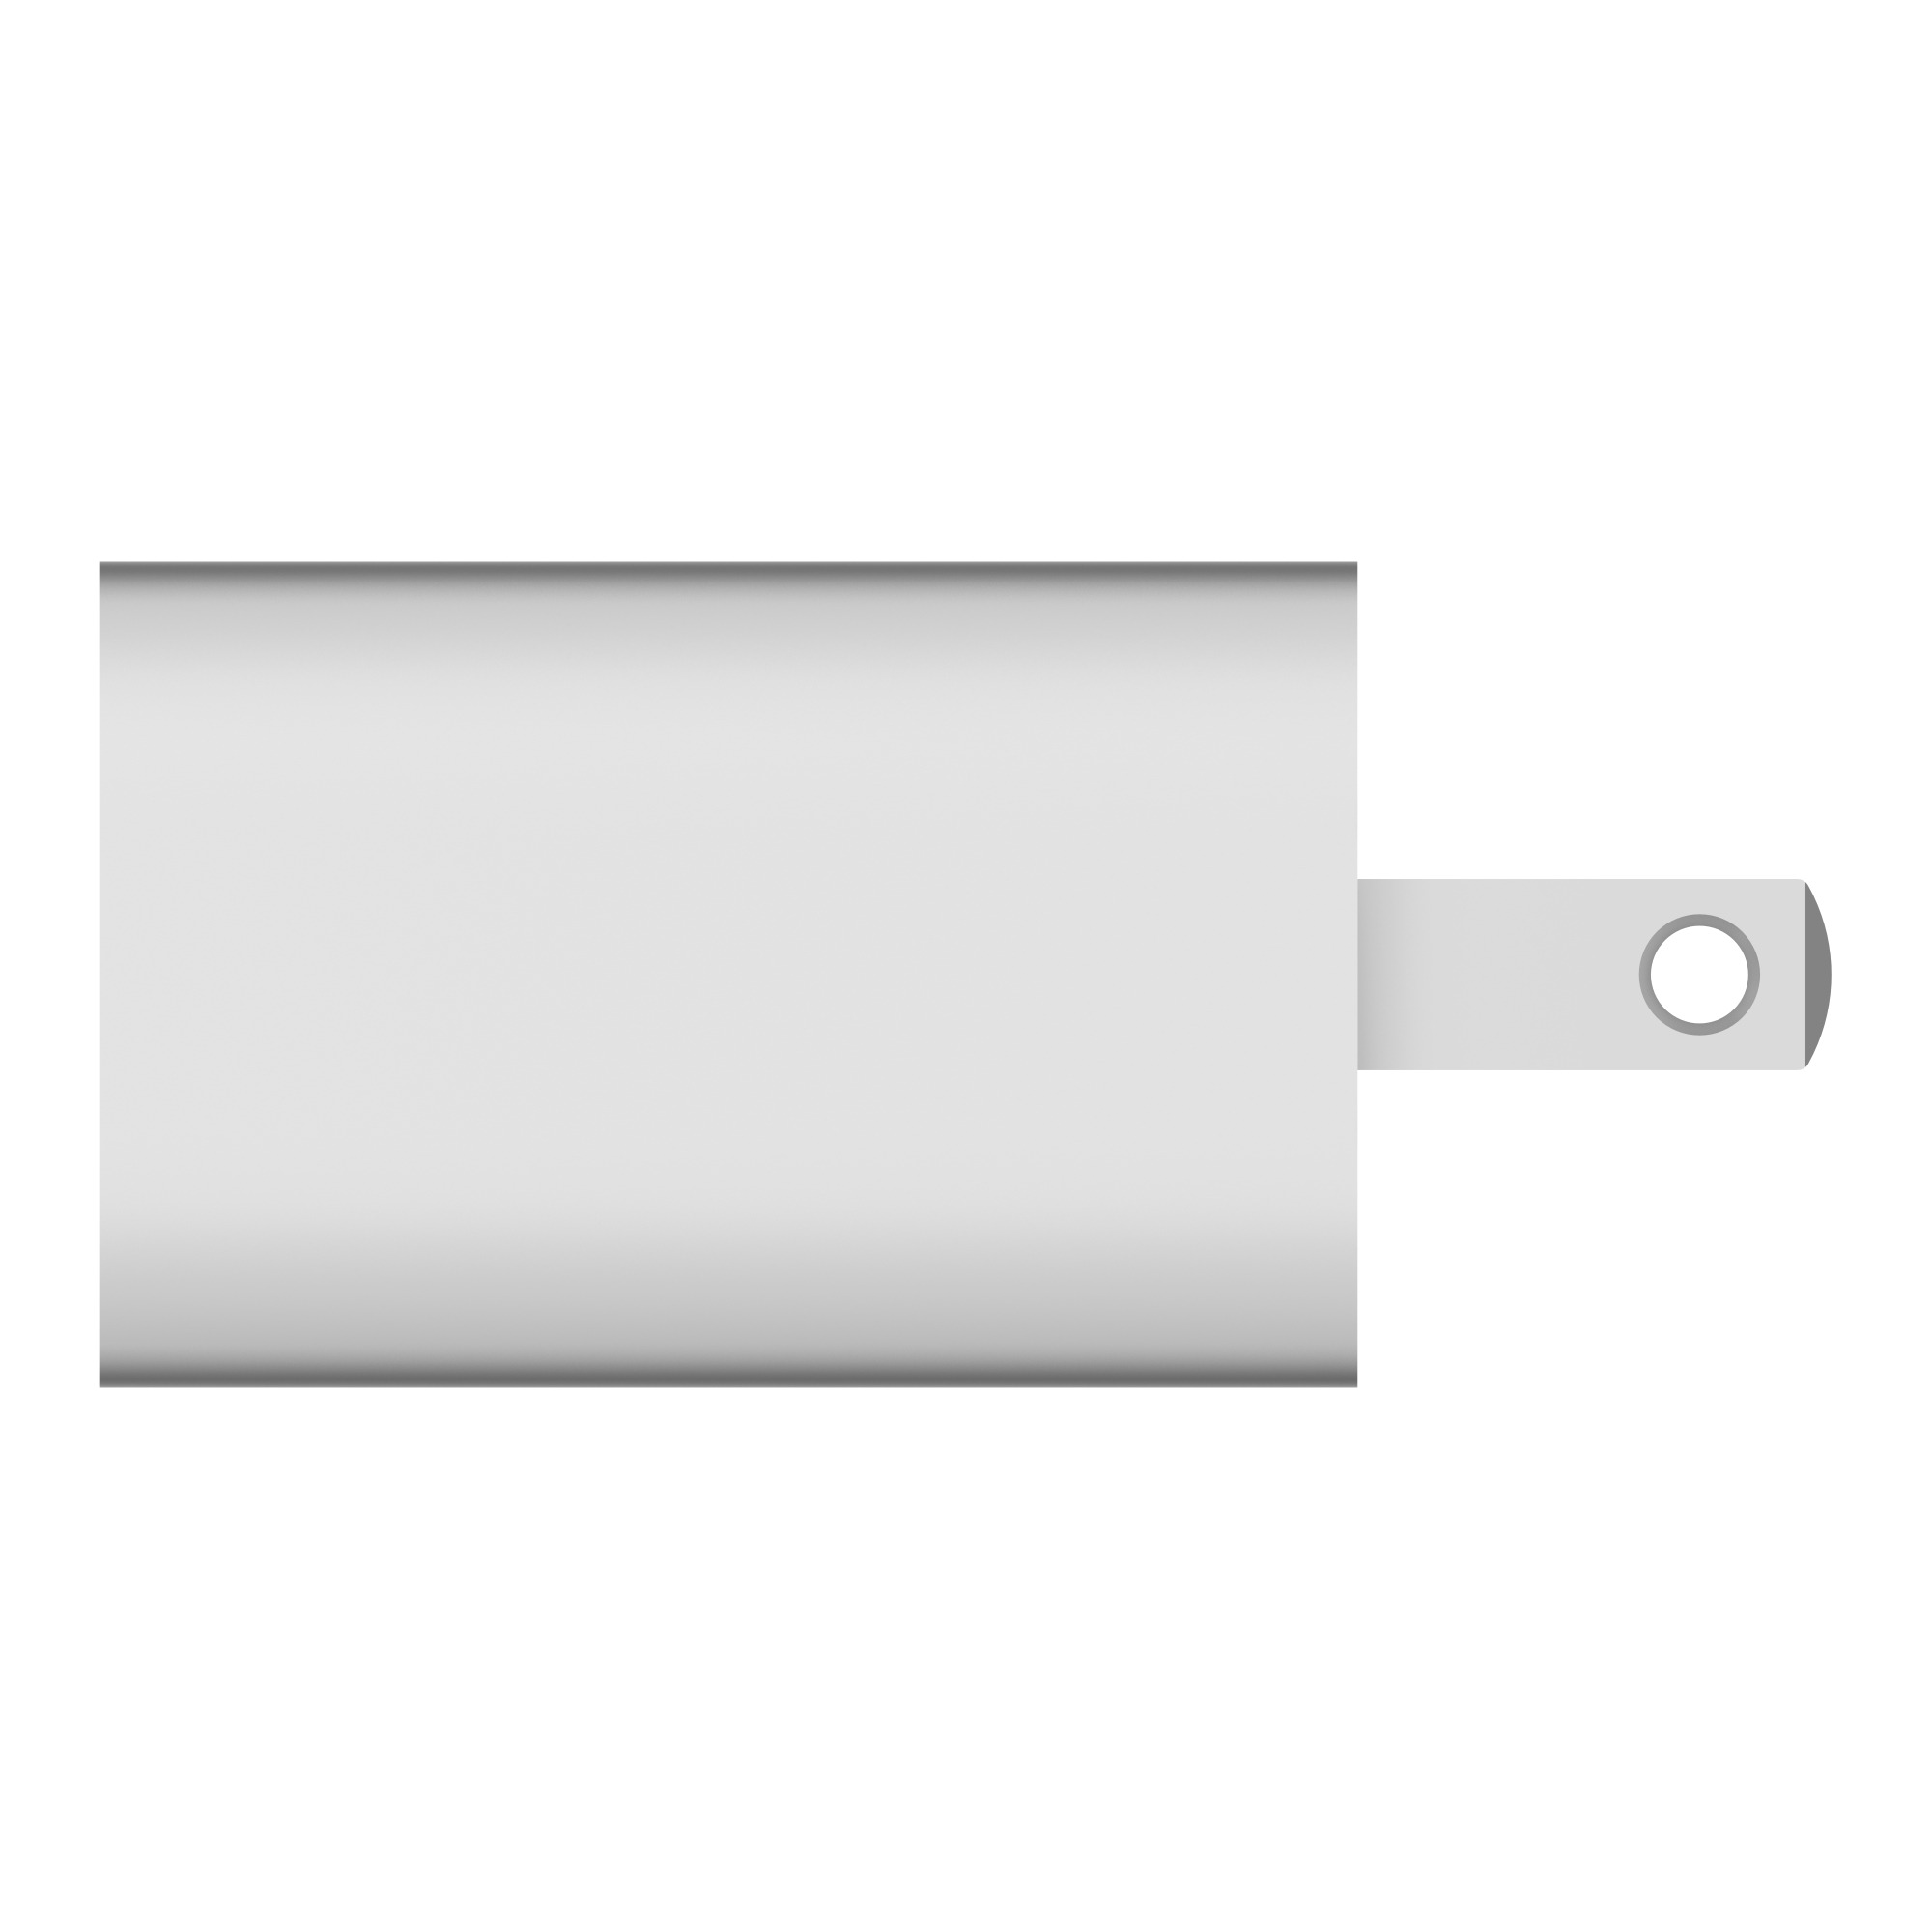 Belkin 20W USB C Wall Fast Charger - for iPhone , Samsung Galaxy, iPad, AirPods & More - Silver - image 5 of 9